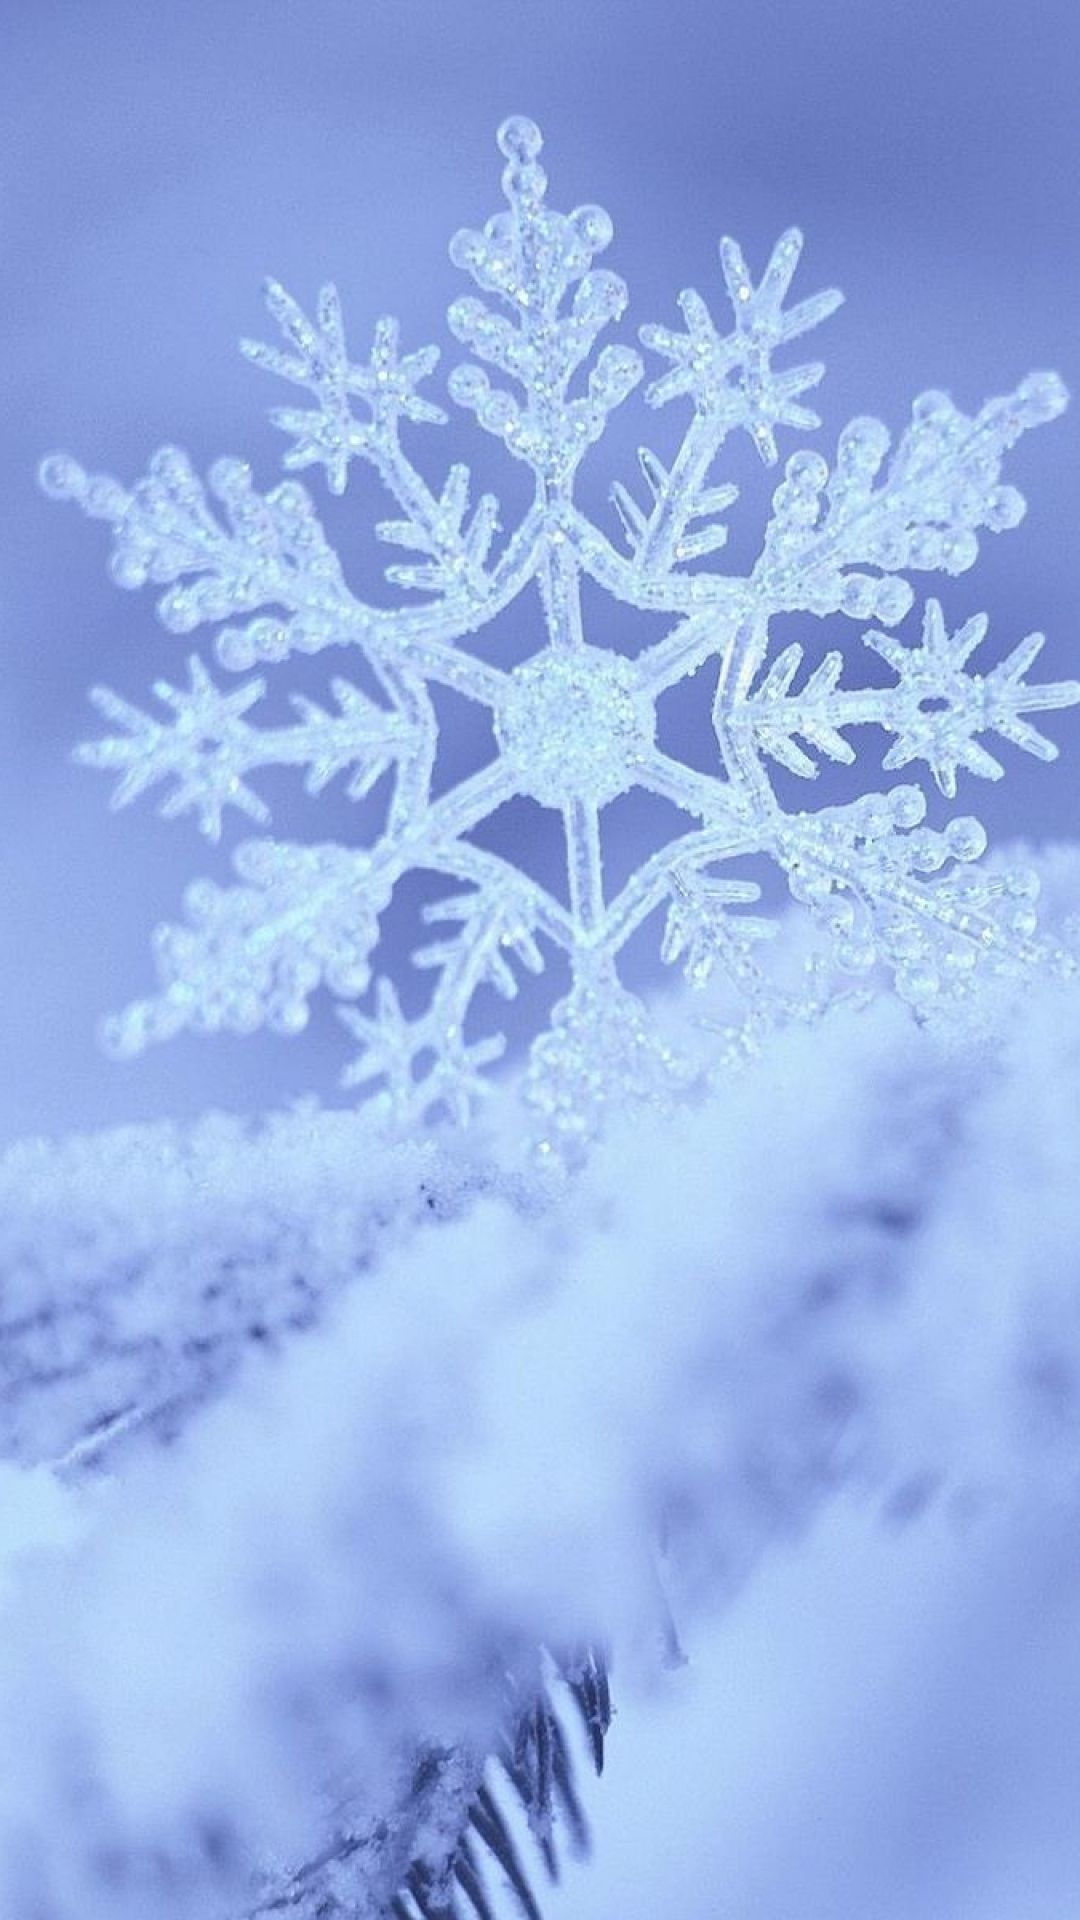 Free Winter Background for iPhone Download. #winterbackground Free Winter Background for iPhone Down. iPhone wallpaper winter, Winter wallpaper, Winter background